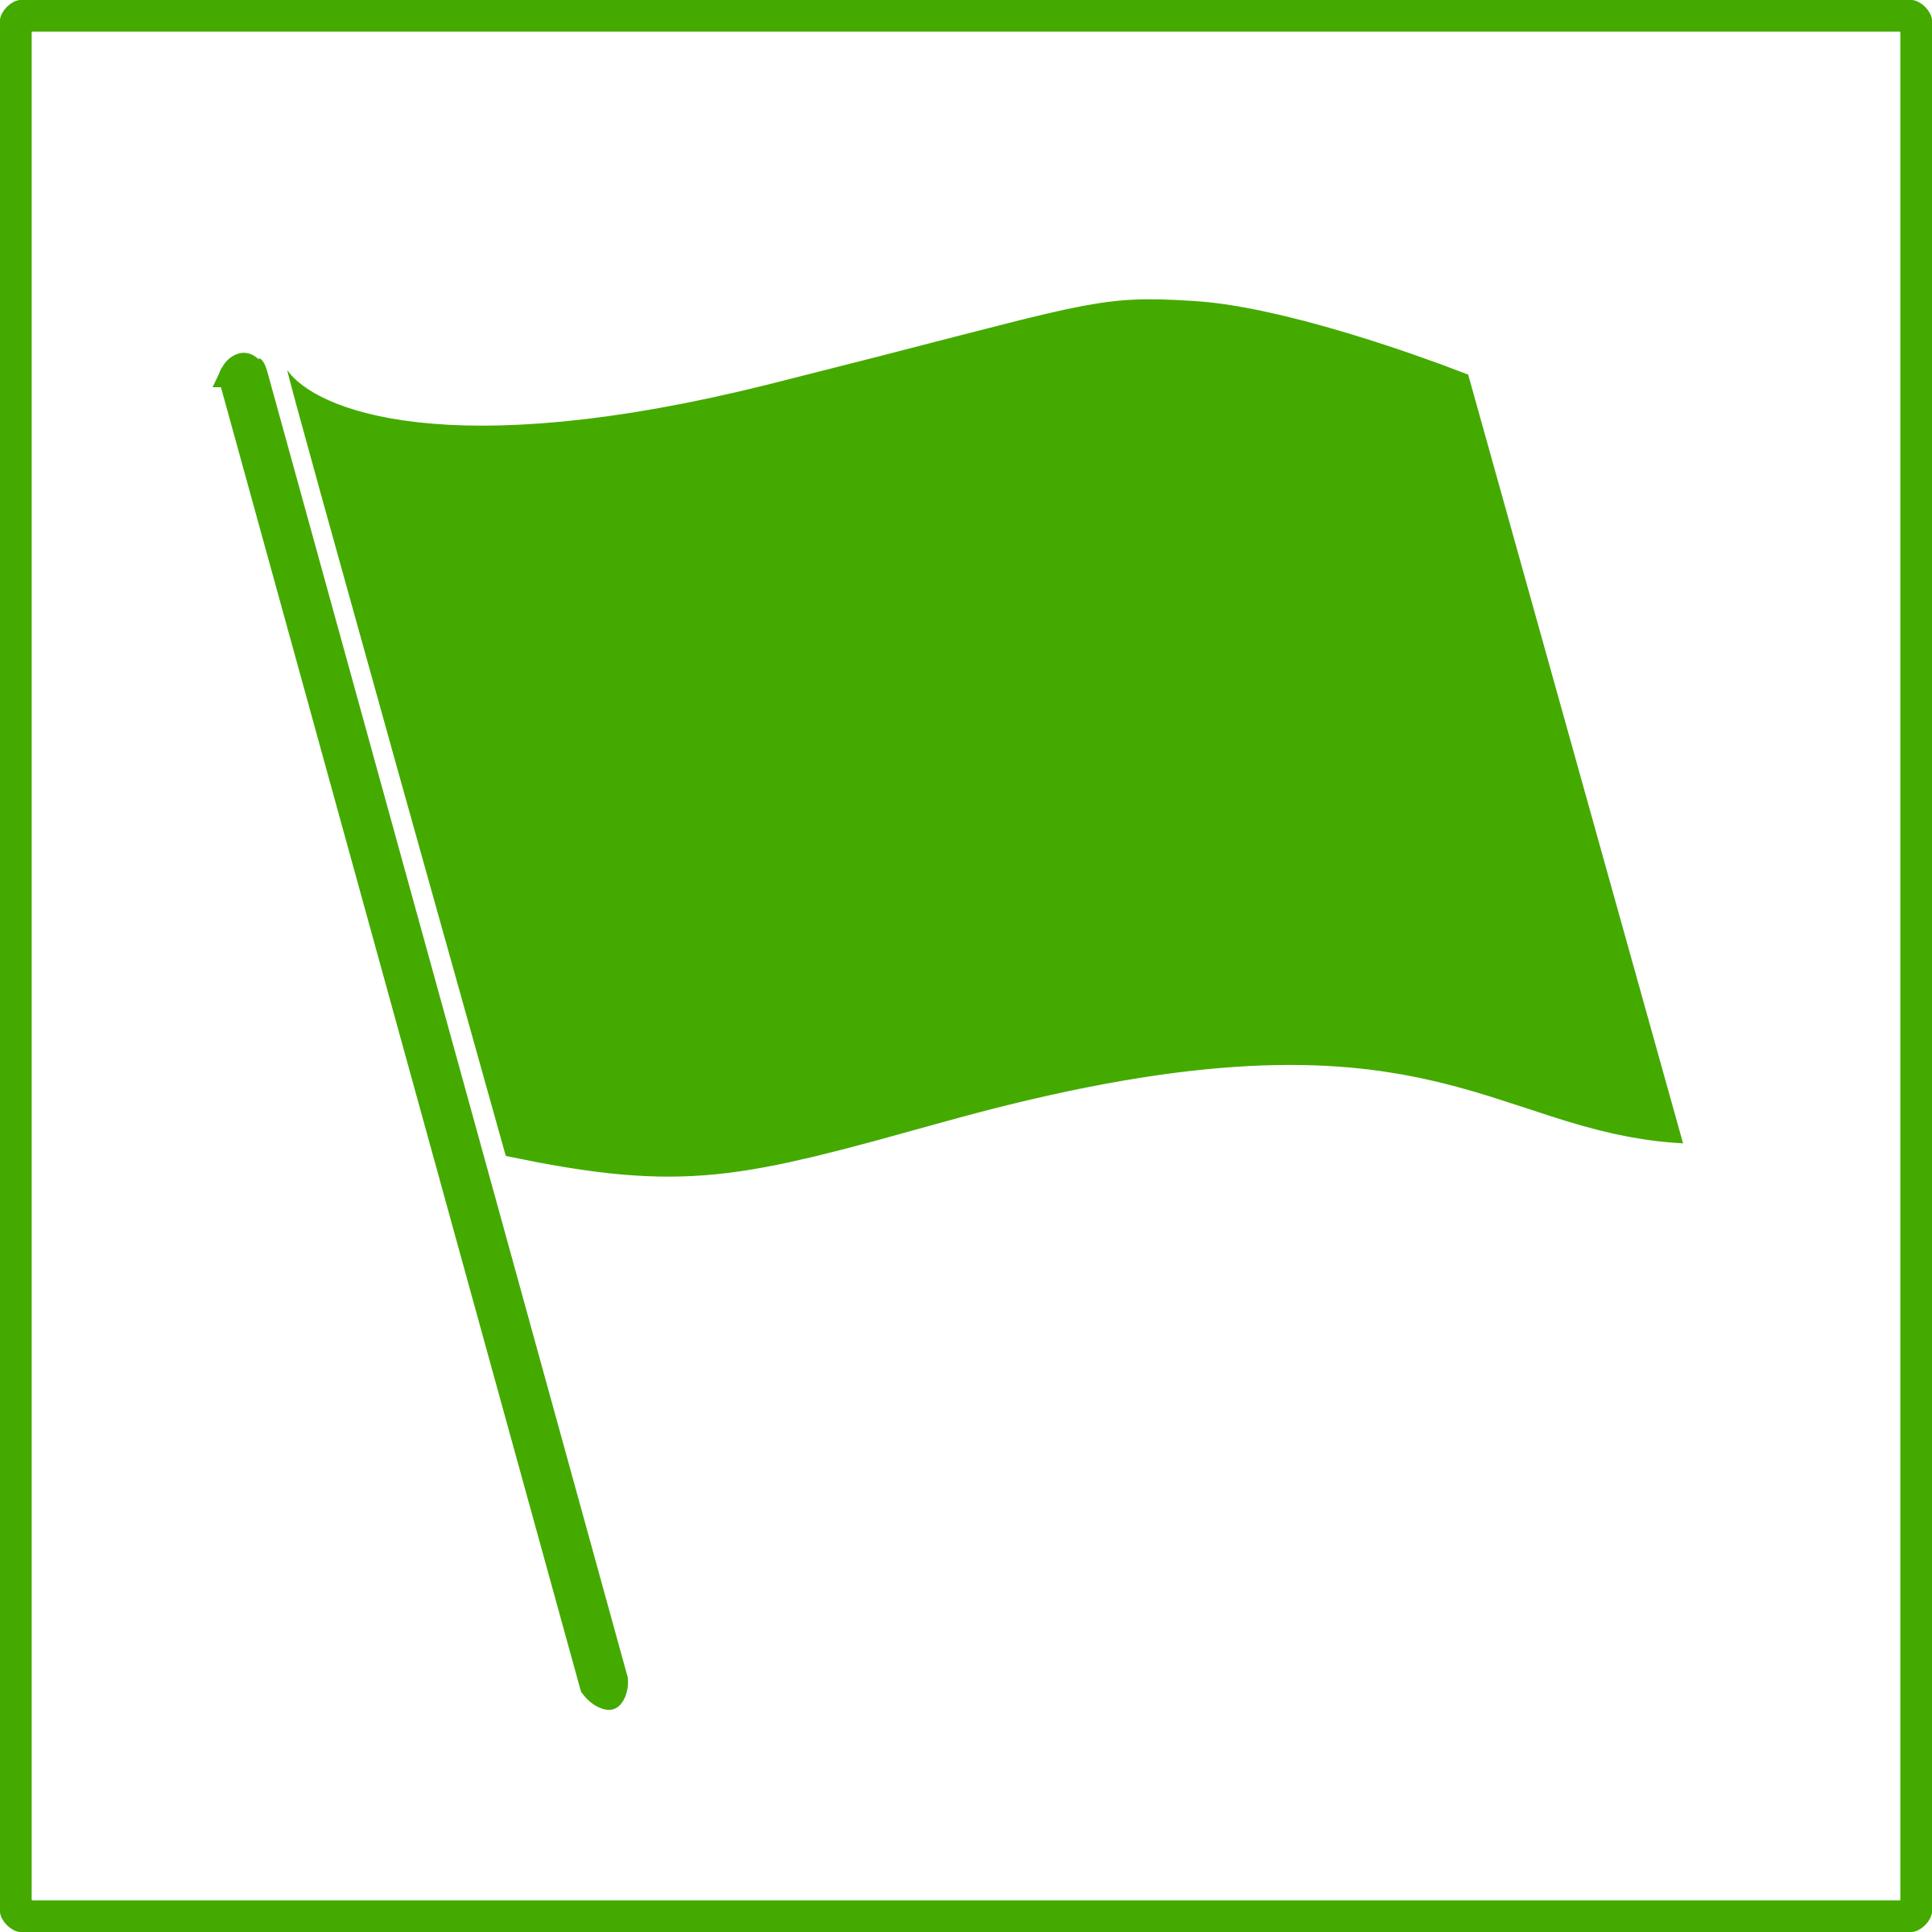 Download Flags Icon, Transparent Flags.PNG Images & Vector ...